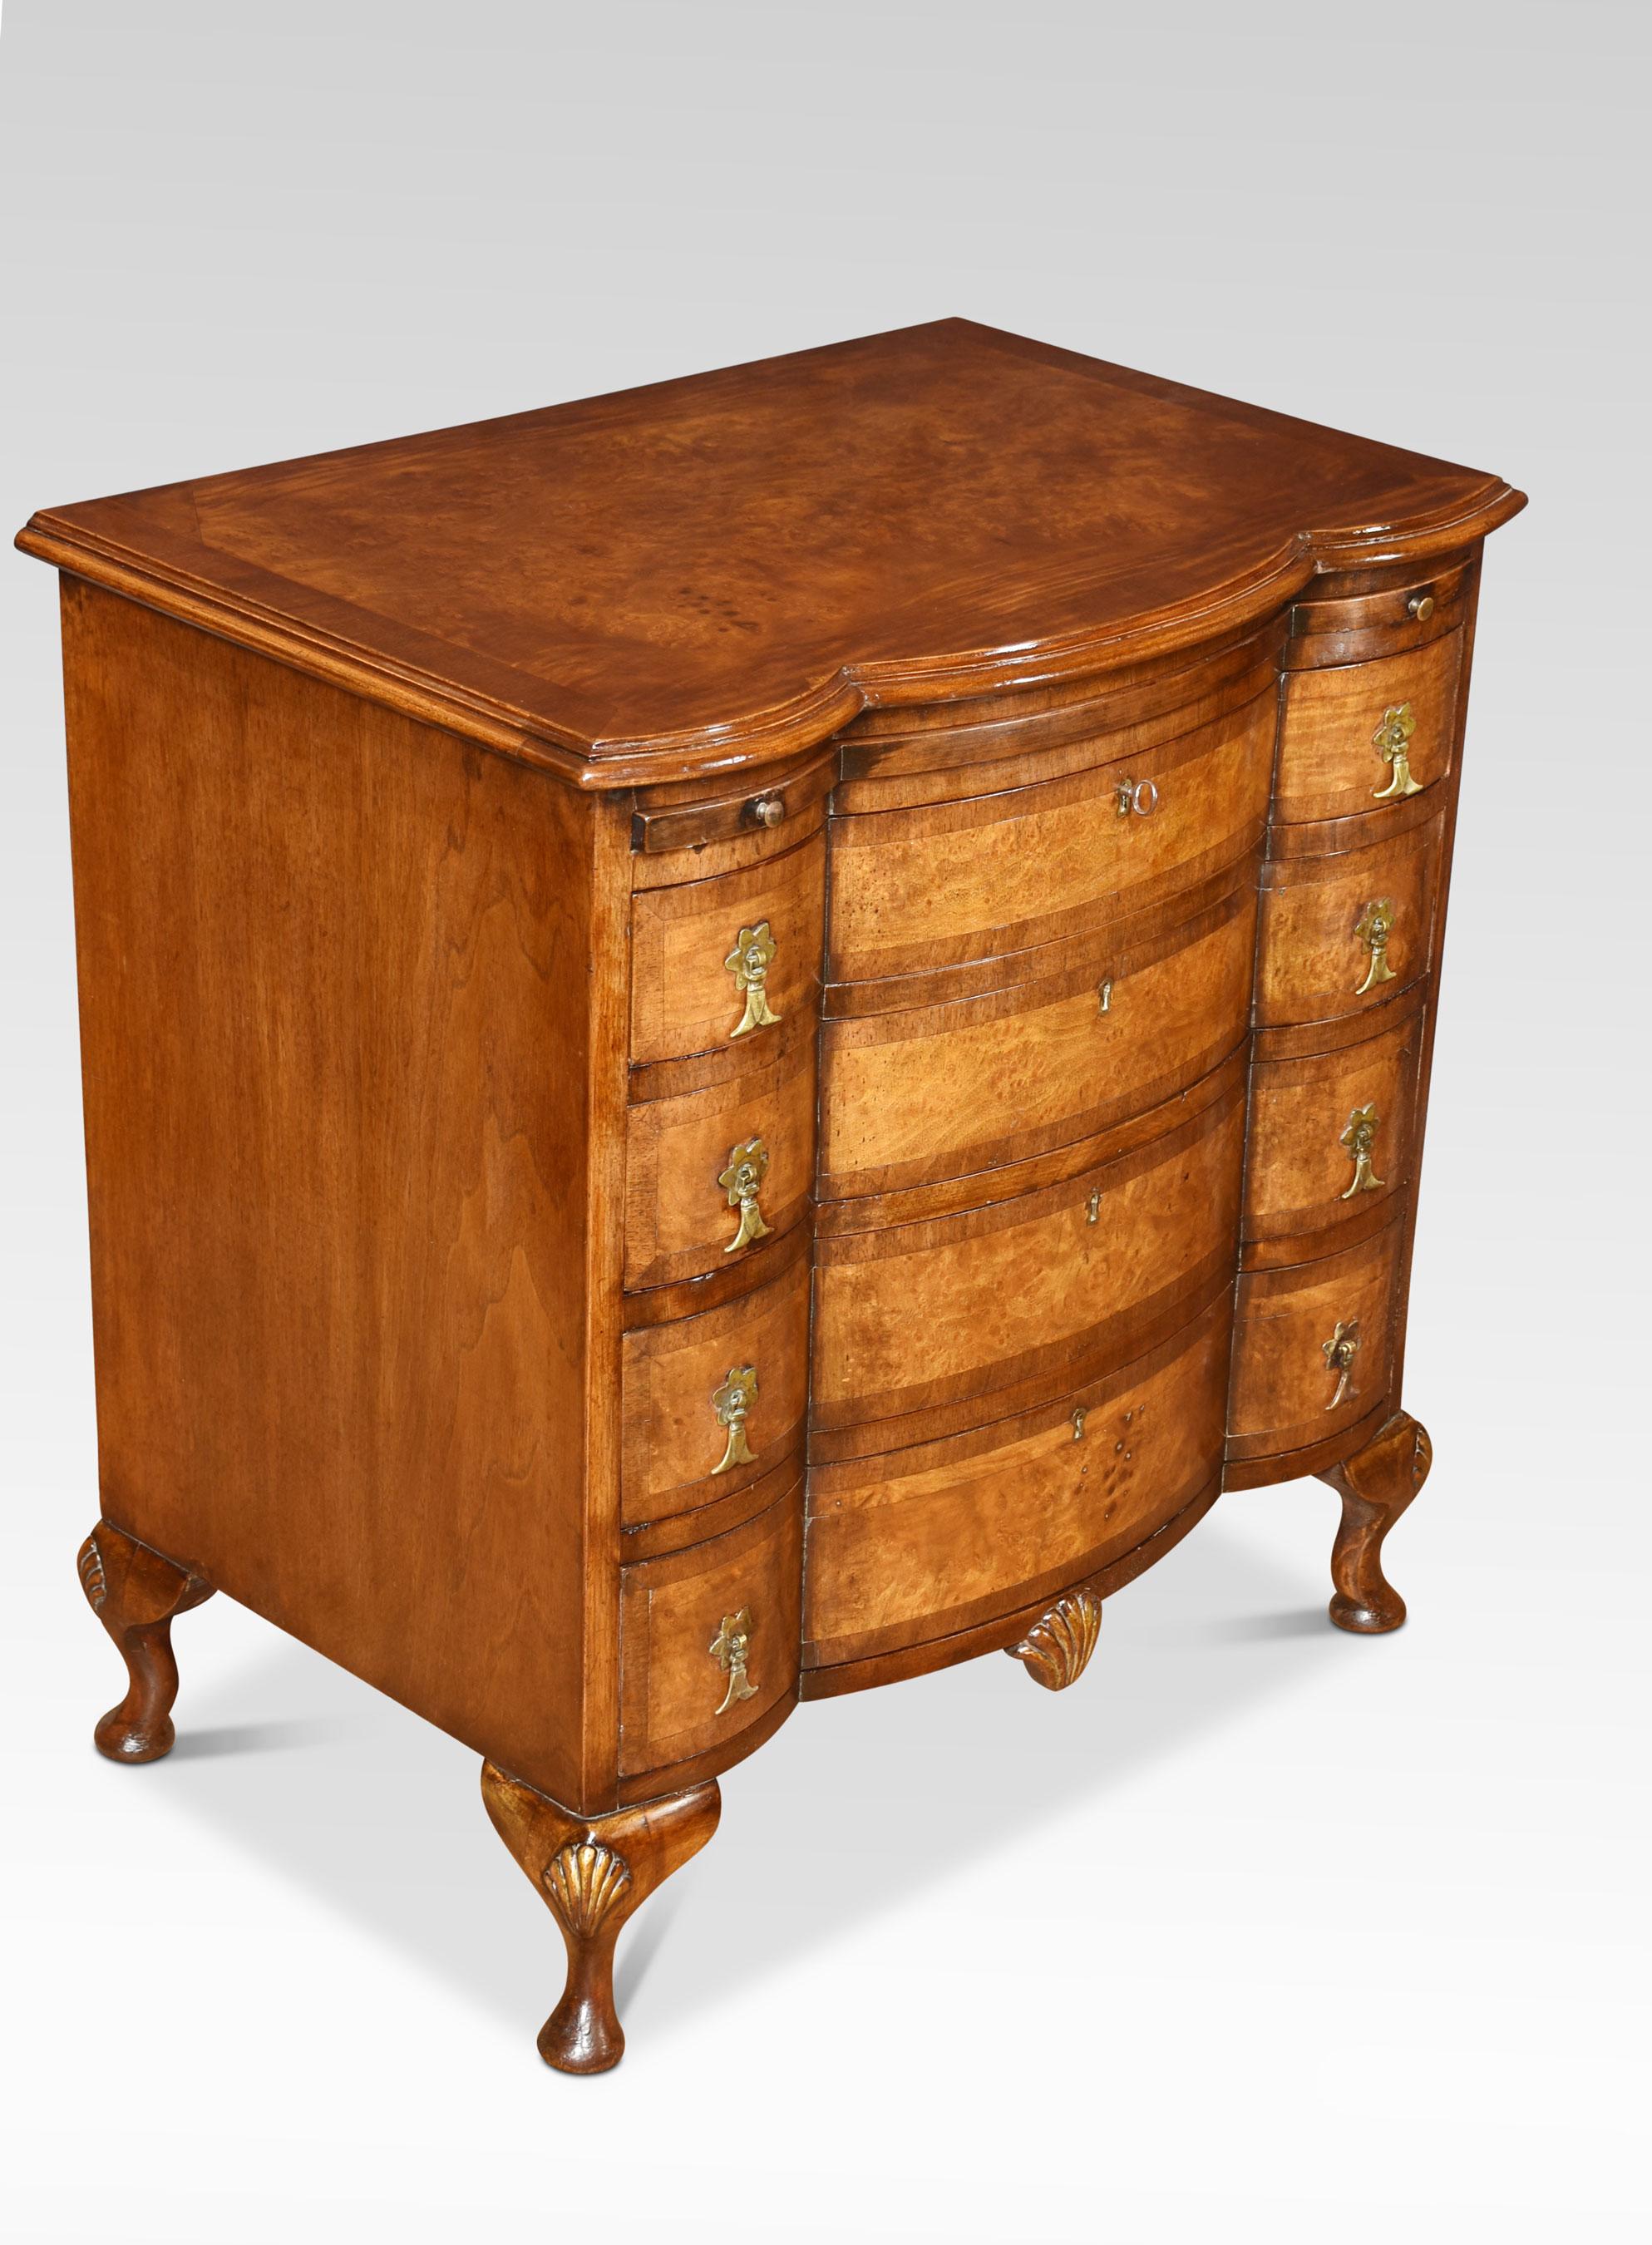 Figured walnut chest of drawers of small proportions The serpentine fronted top with moulded edge above brush in slide, and four long drawers fitted with brass drop handles. All raised up on shell caped cabriole legs.
Dimensions
Height 29